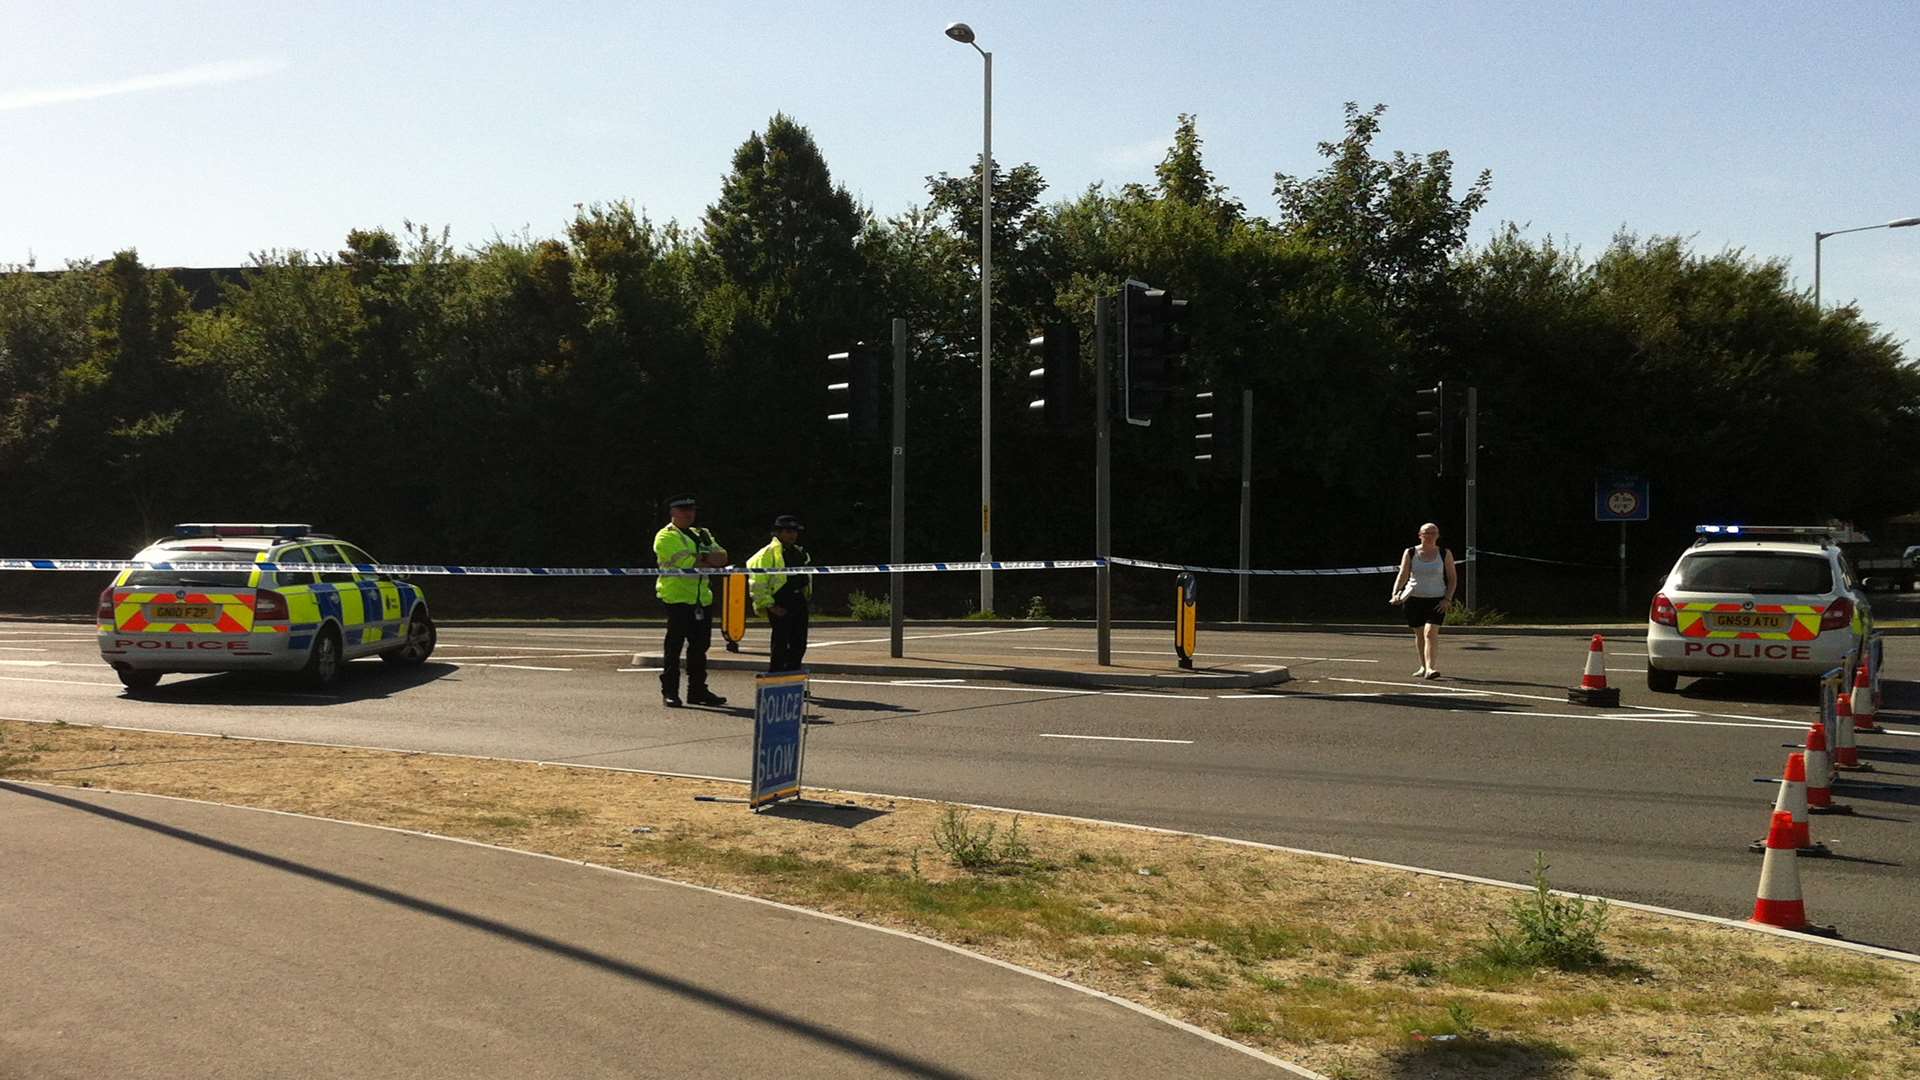 Eurolink Way in Sittingbourne was blocked after the accident